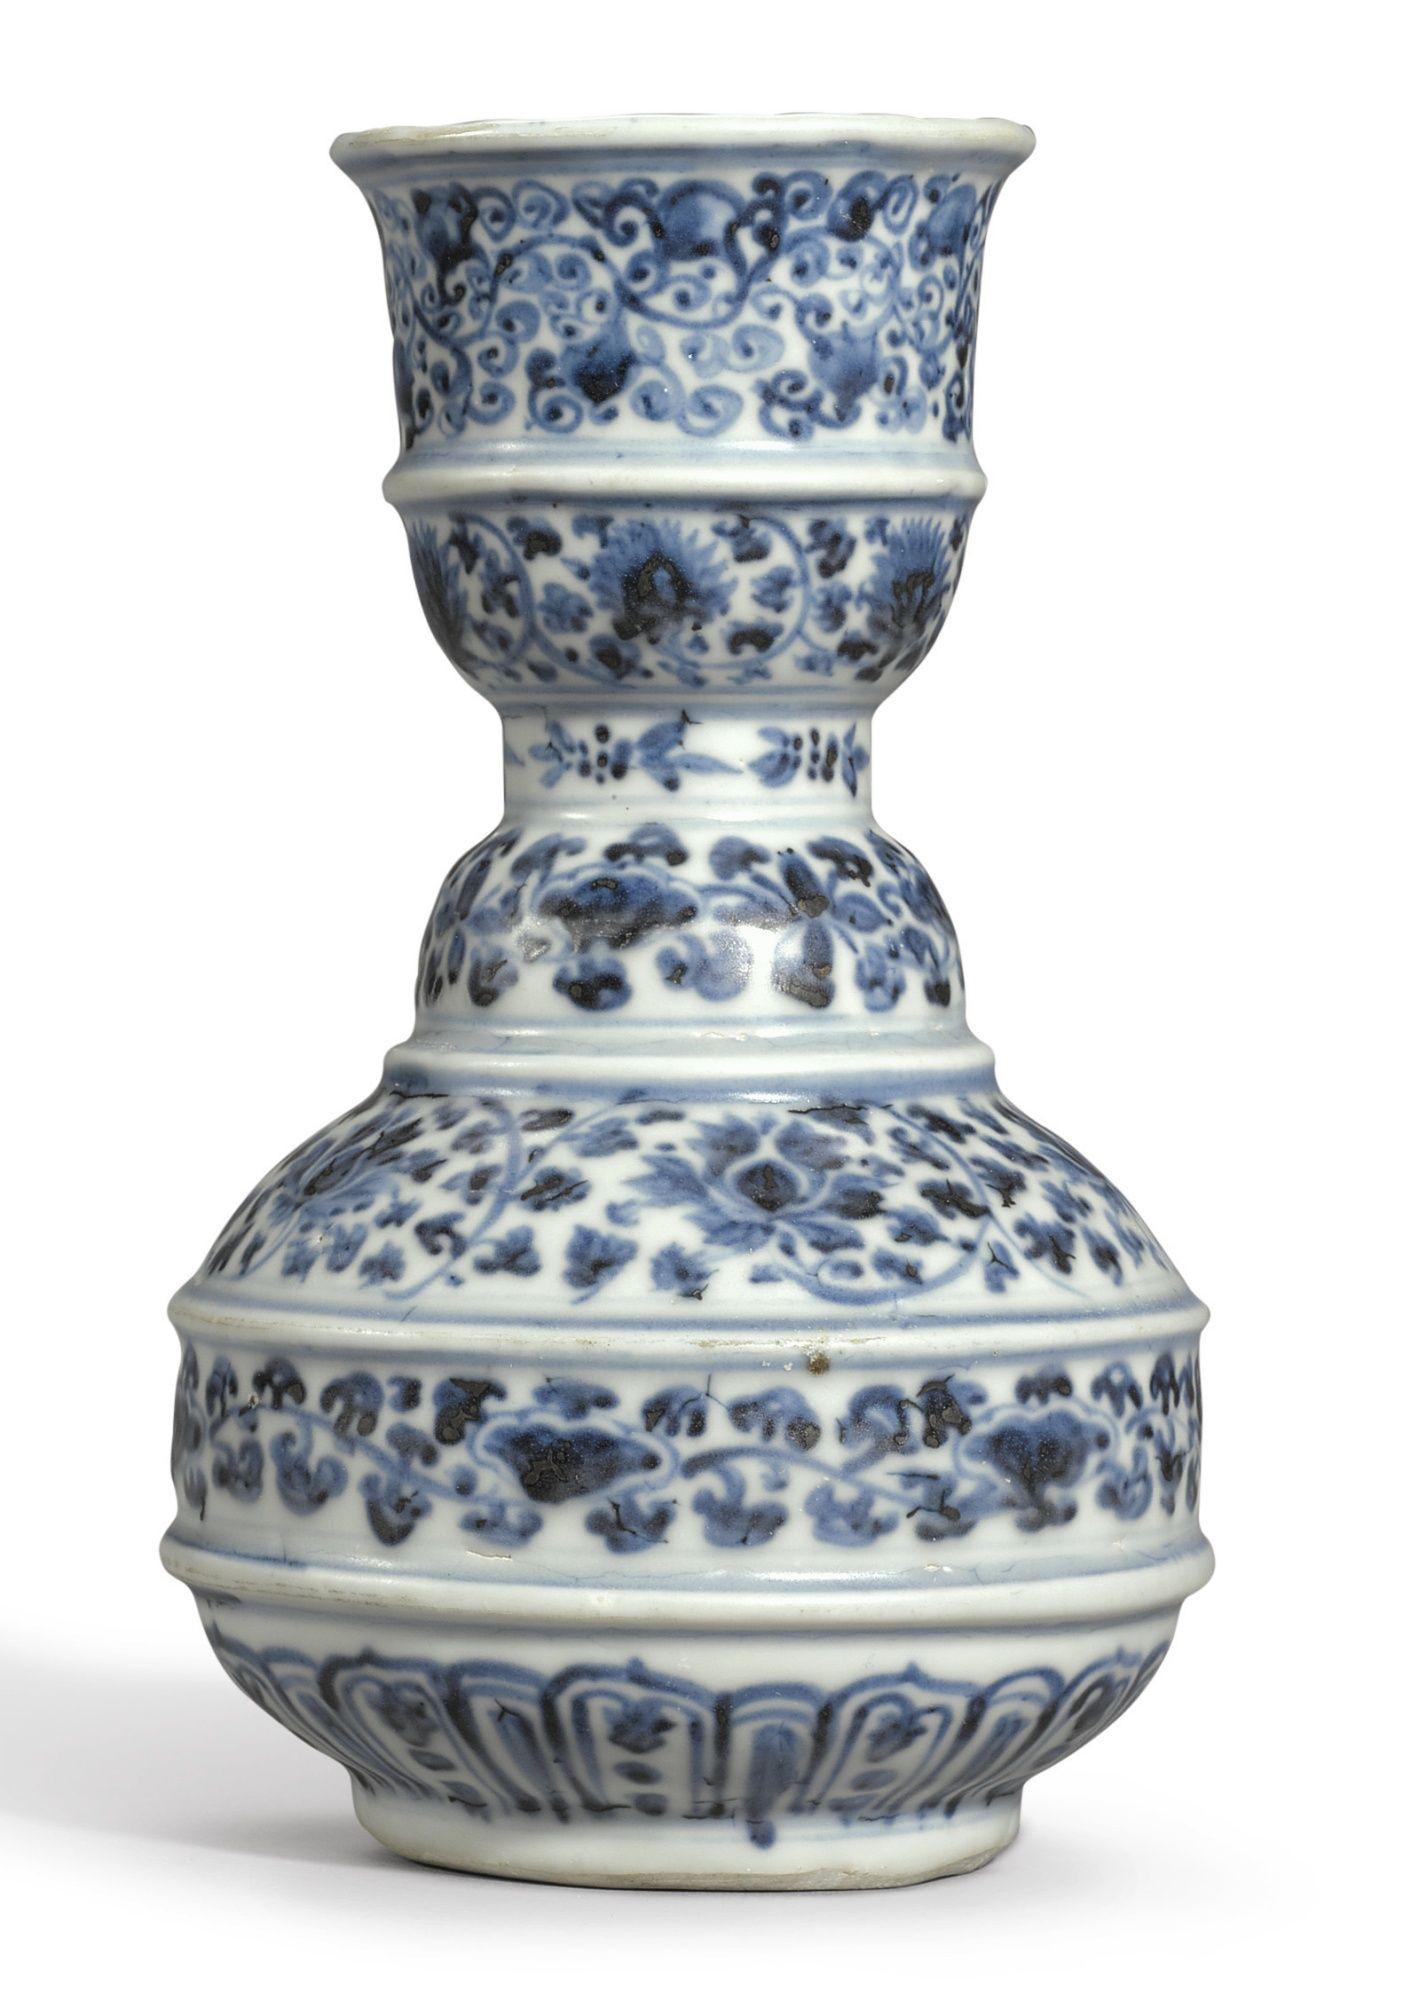 17 Stunning Blue and White Chinese Vases Antique 2024 free download blue and white chinese vases antique of a rare blue and white water vessel ming dynasty late 15th early pertaining to a rare blue and white water vessel ming dynasty late 15th early 16th cen